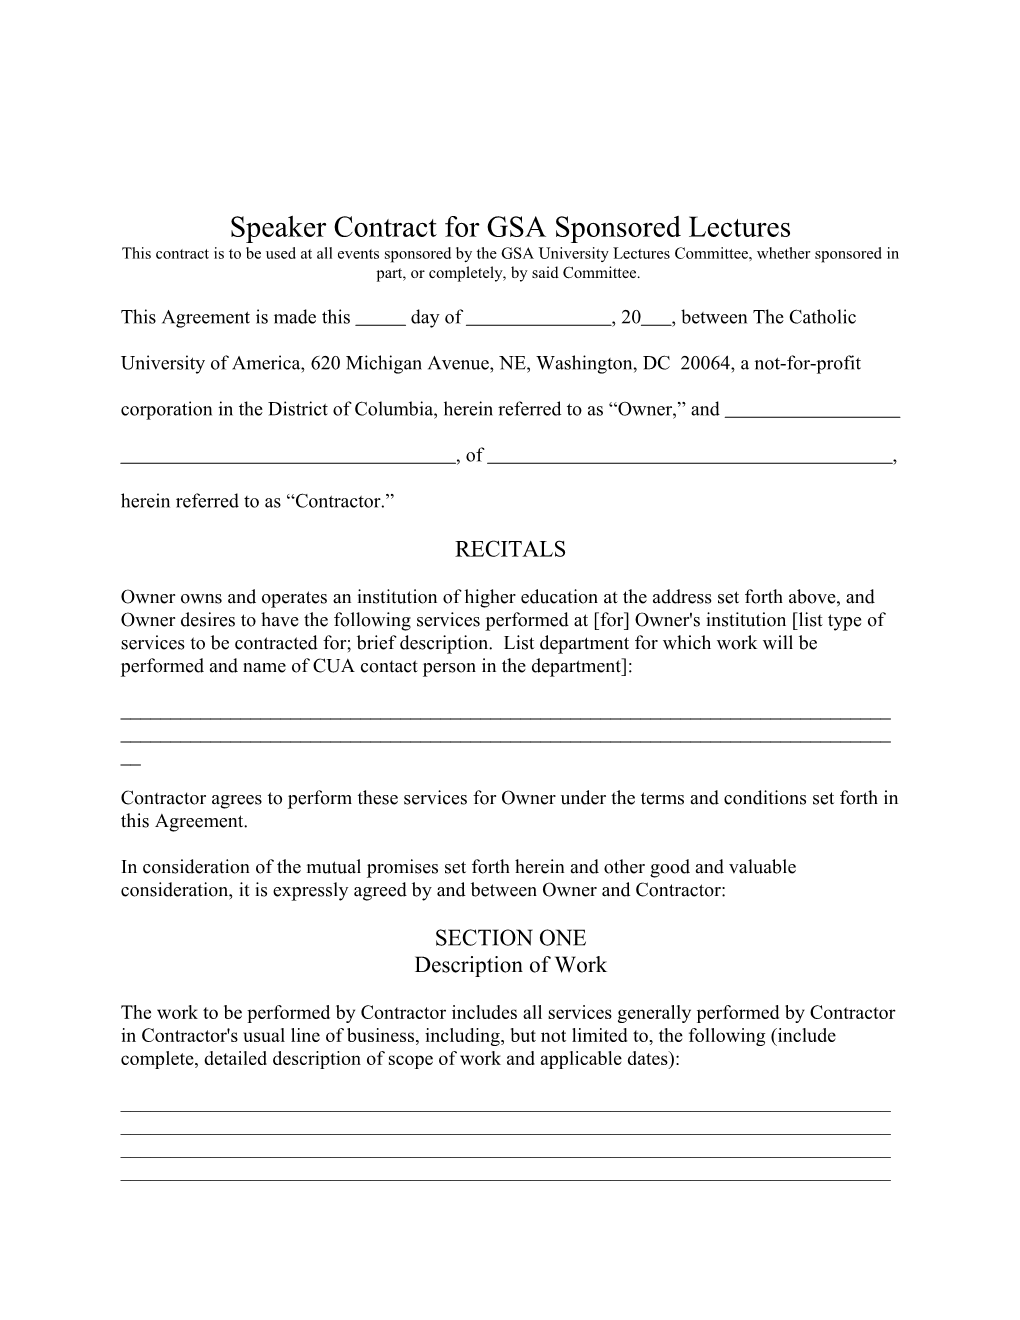 Speaker Contract for GSA Sponsored Lectures